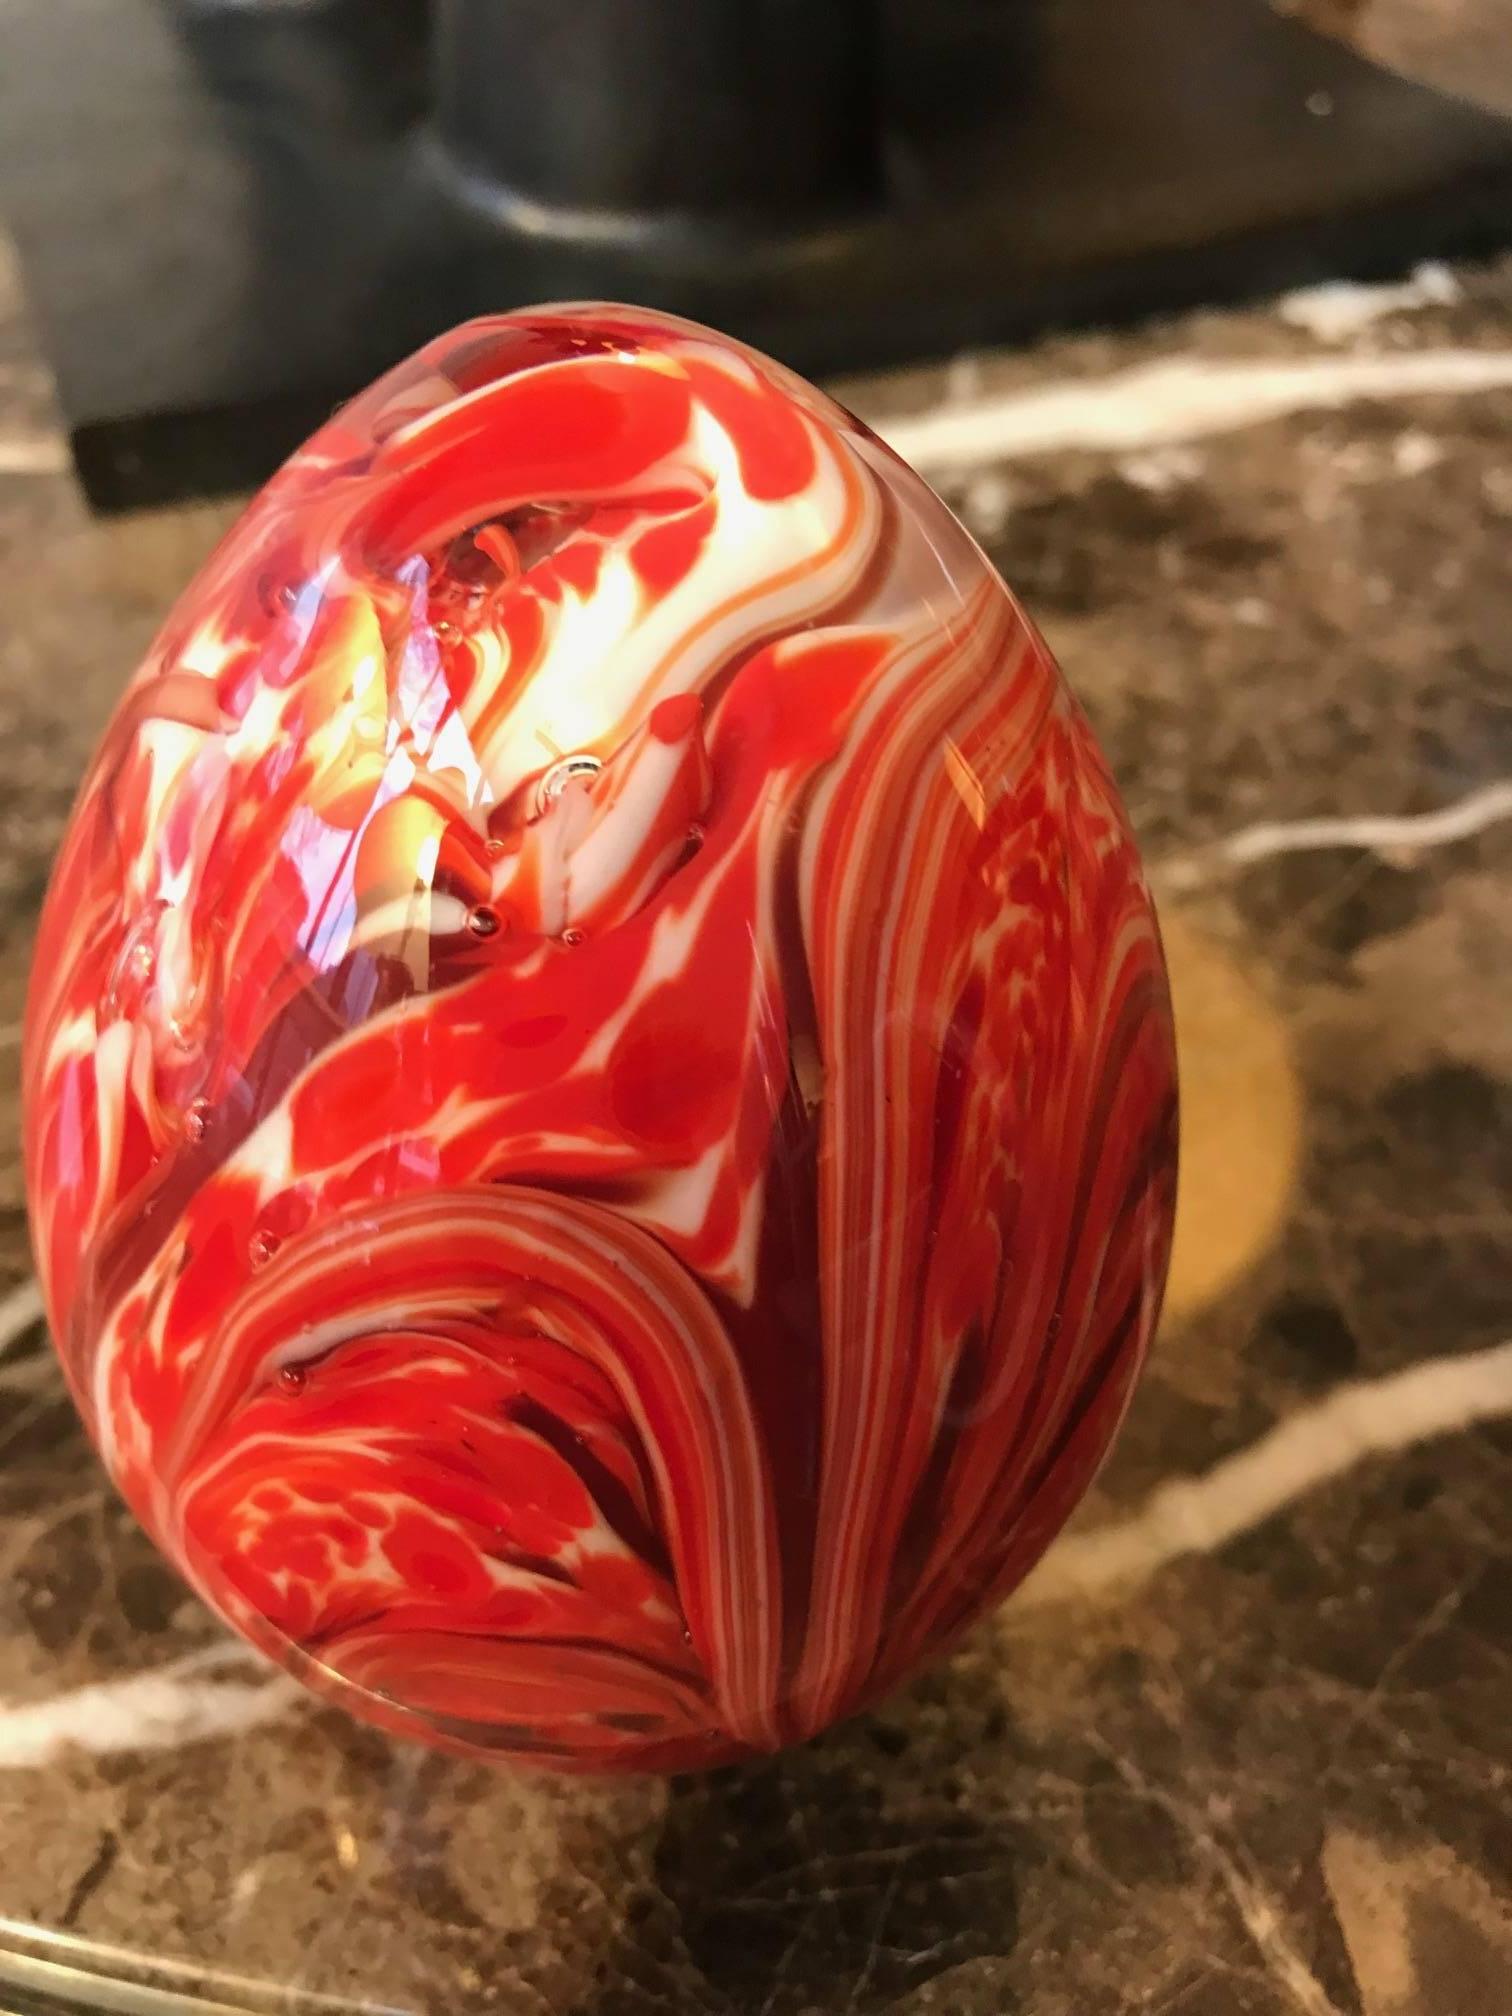 A large egg shaped Murano art glass paperweight with colorful swirl inclusions.
Beautiful decorative tabletop object.